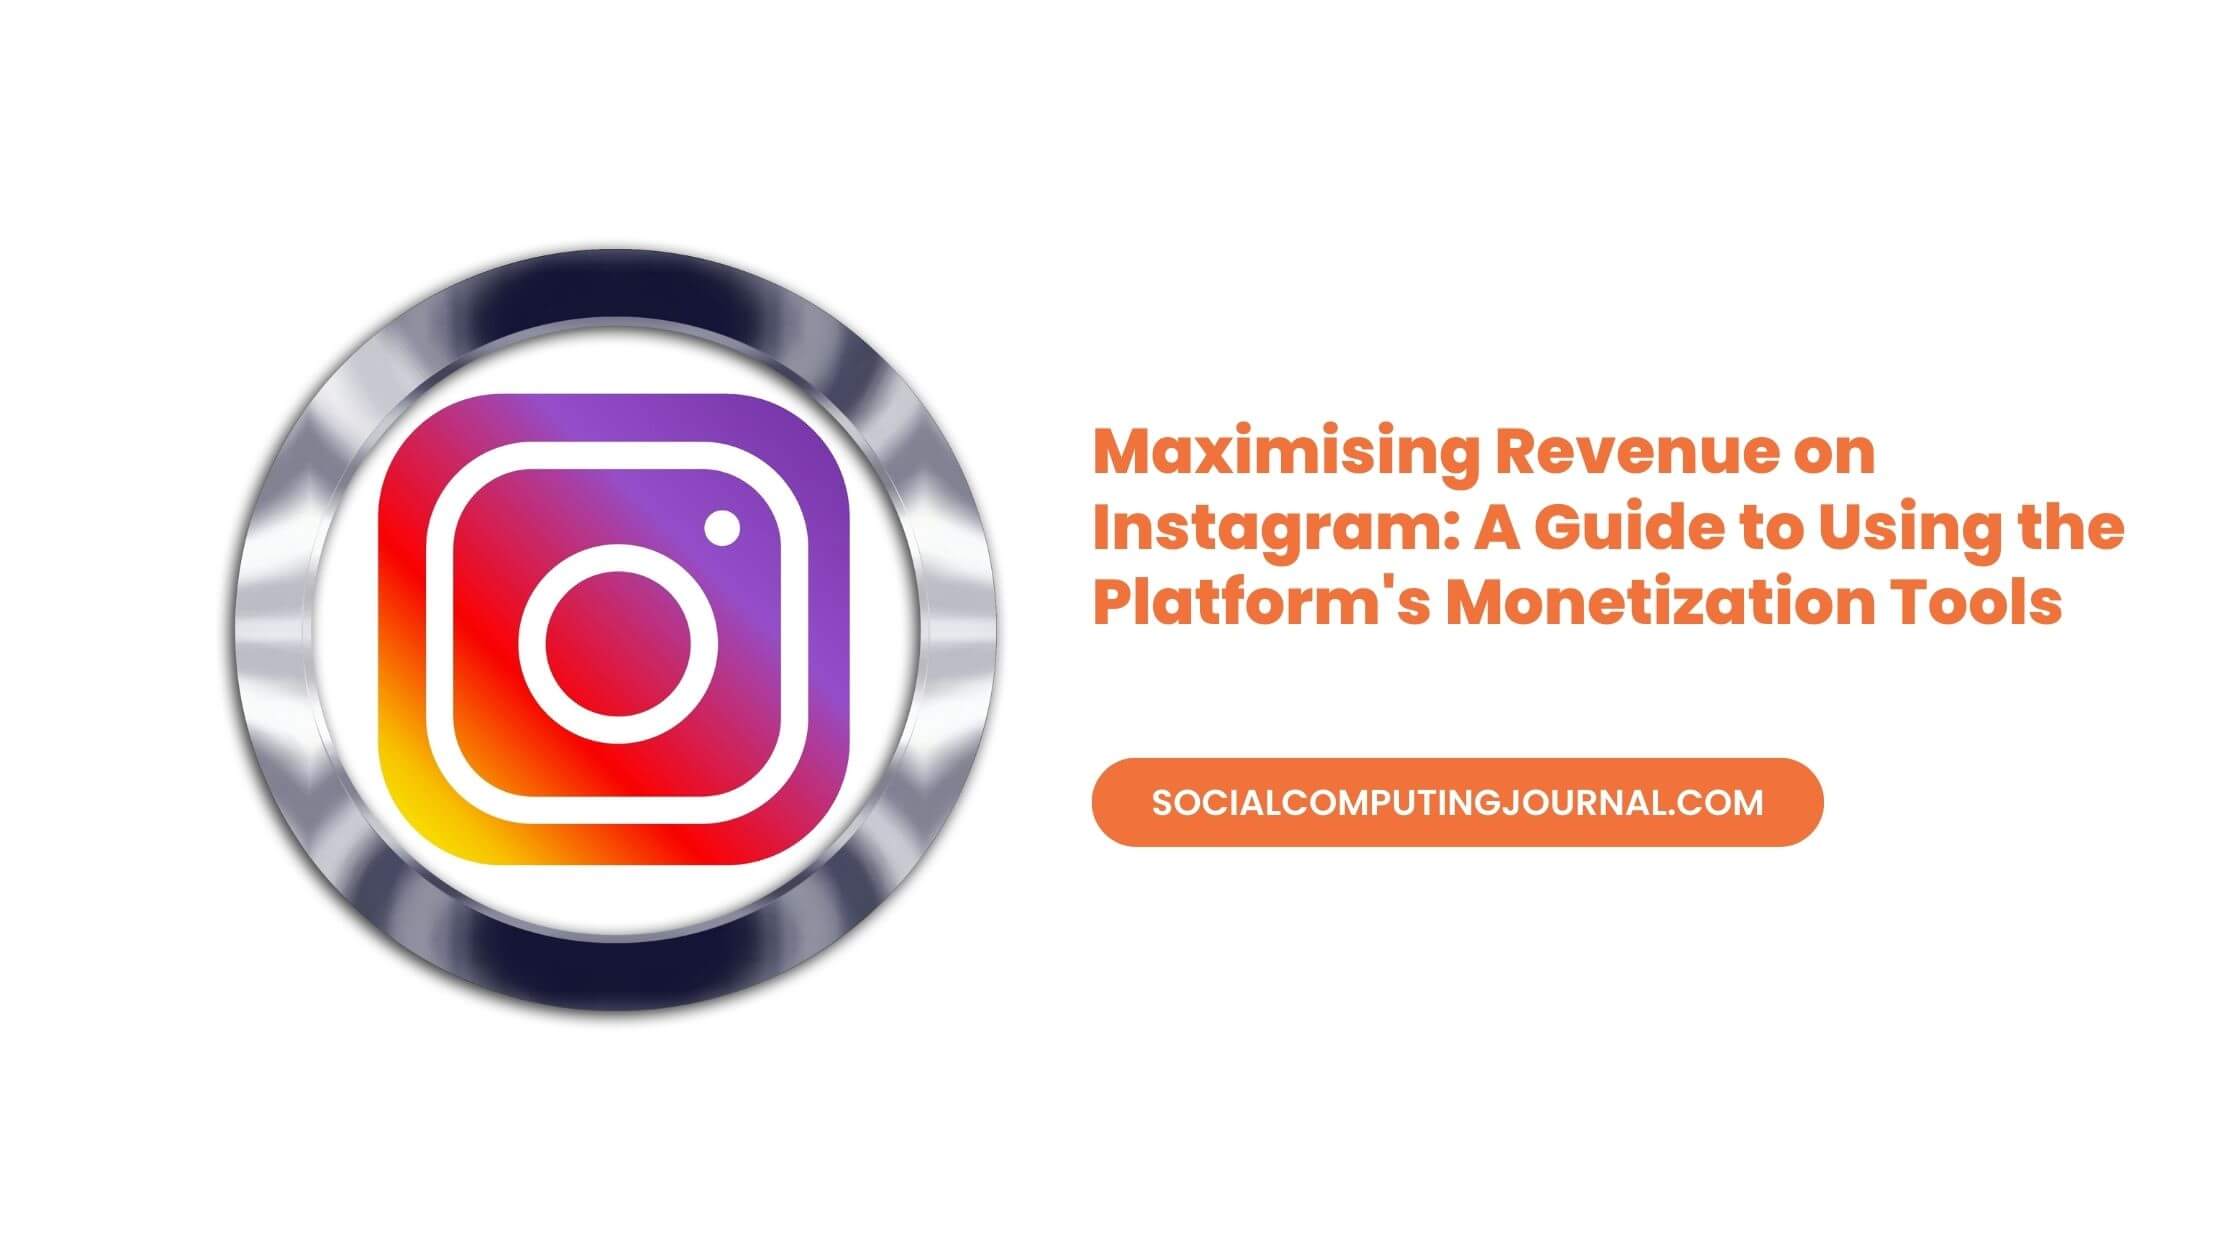 Maximising Revenue on Instagram A Guide to Using the Platform's Monetization Tools